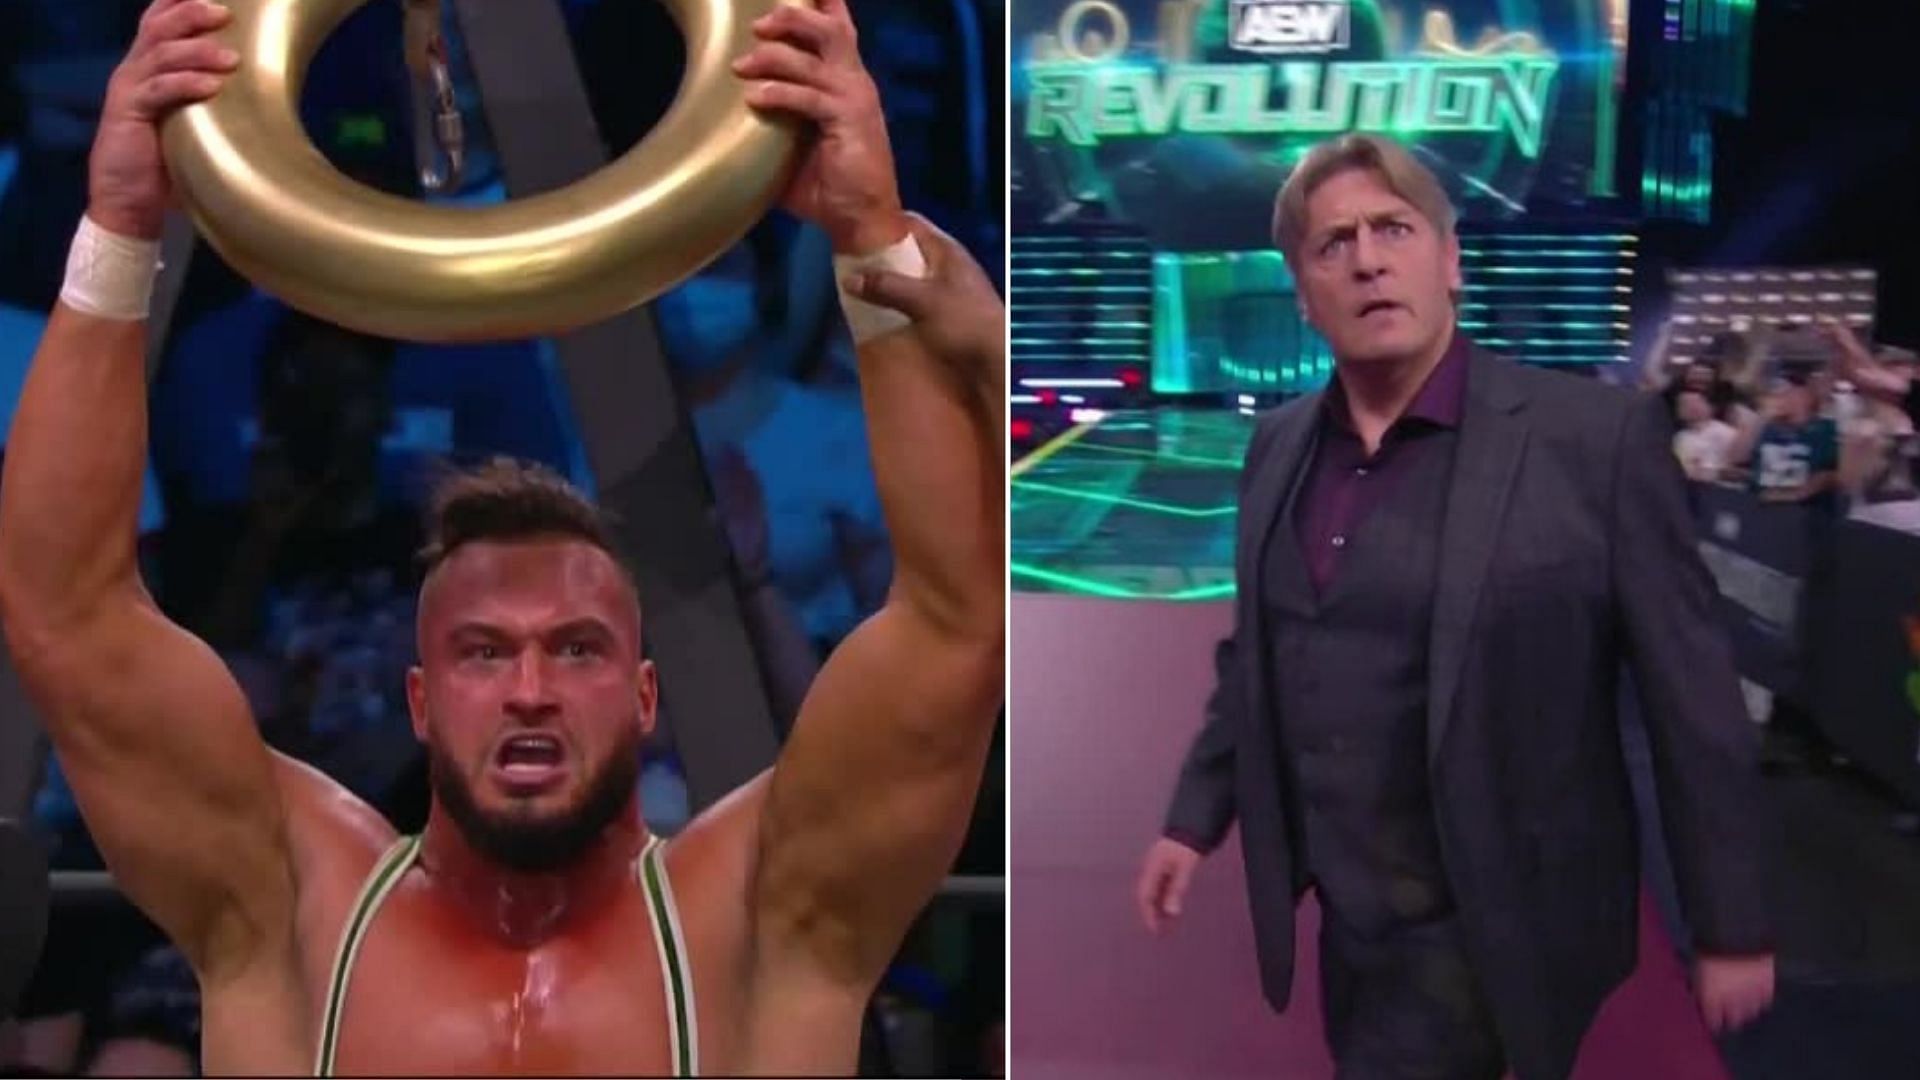 Wardlow became the Face of the Revolution, and William Regal made his presence felt